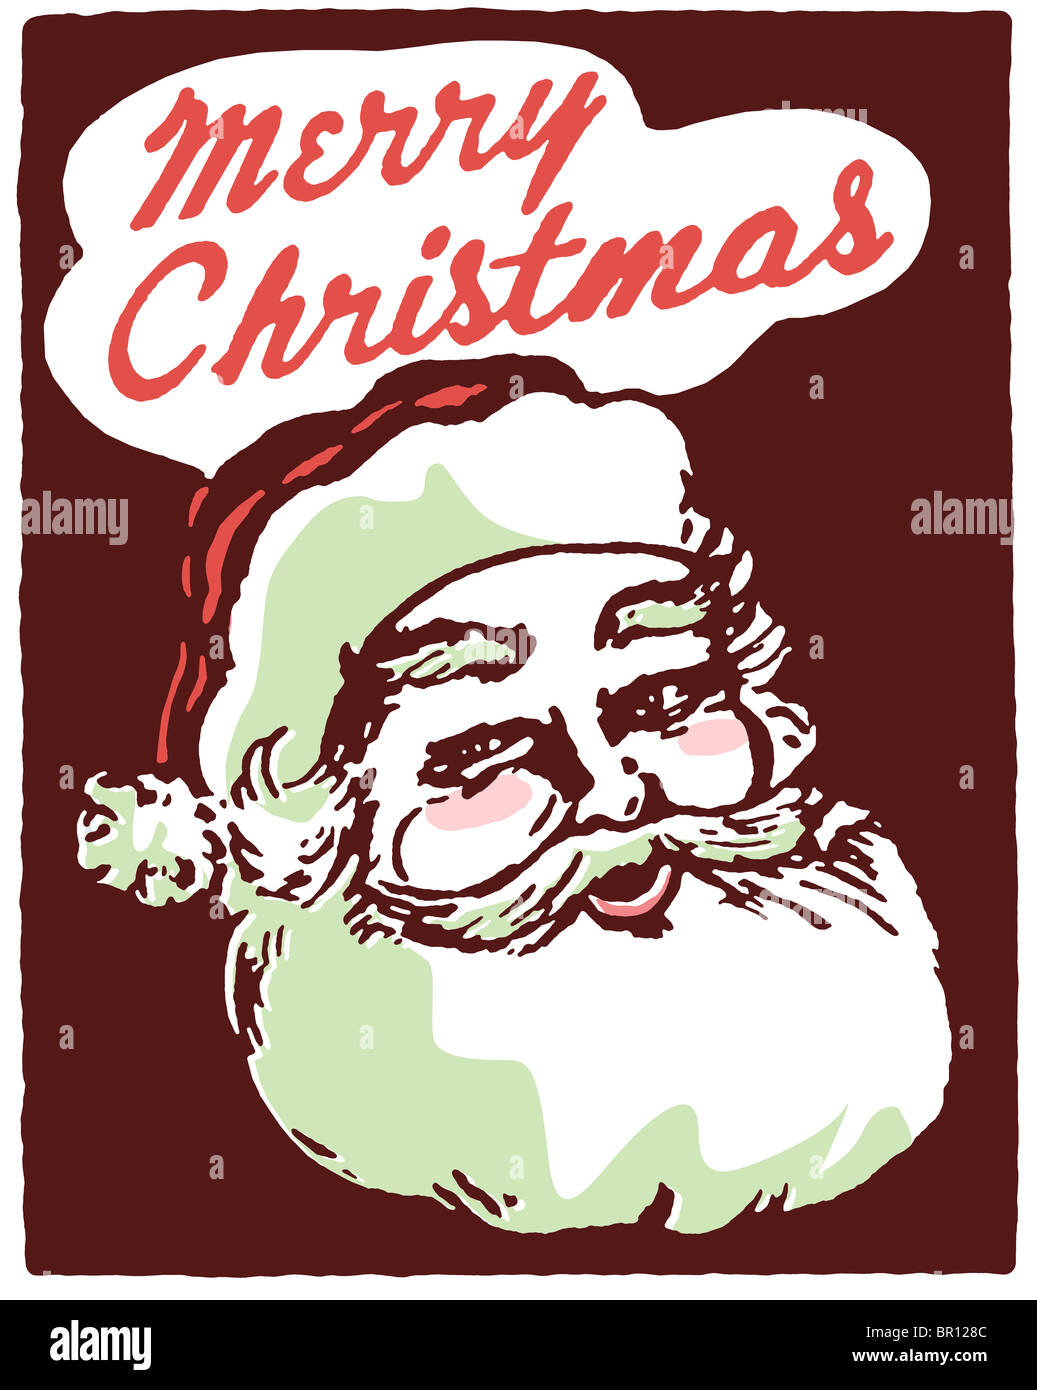 A Christmas inspired Santa illustration with the text Merry Christmas ...